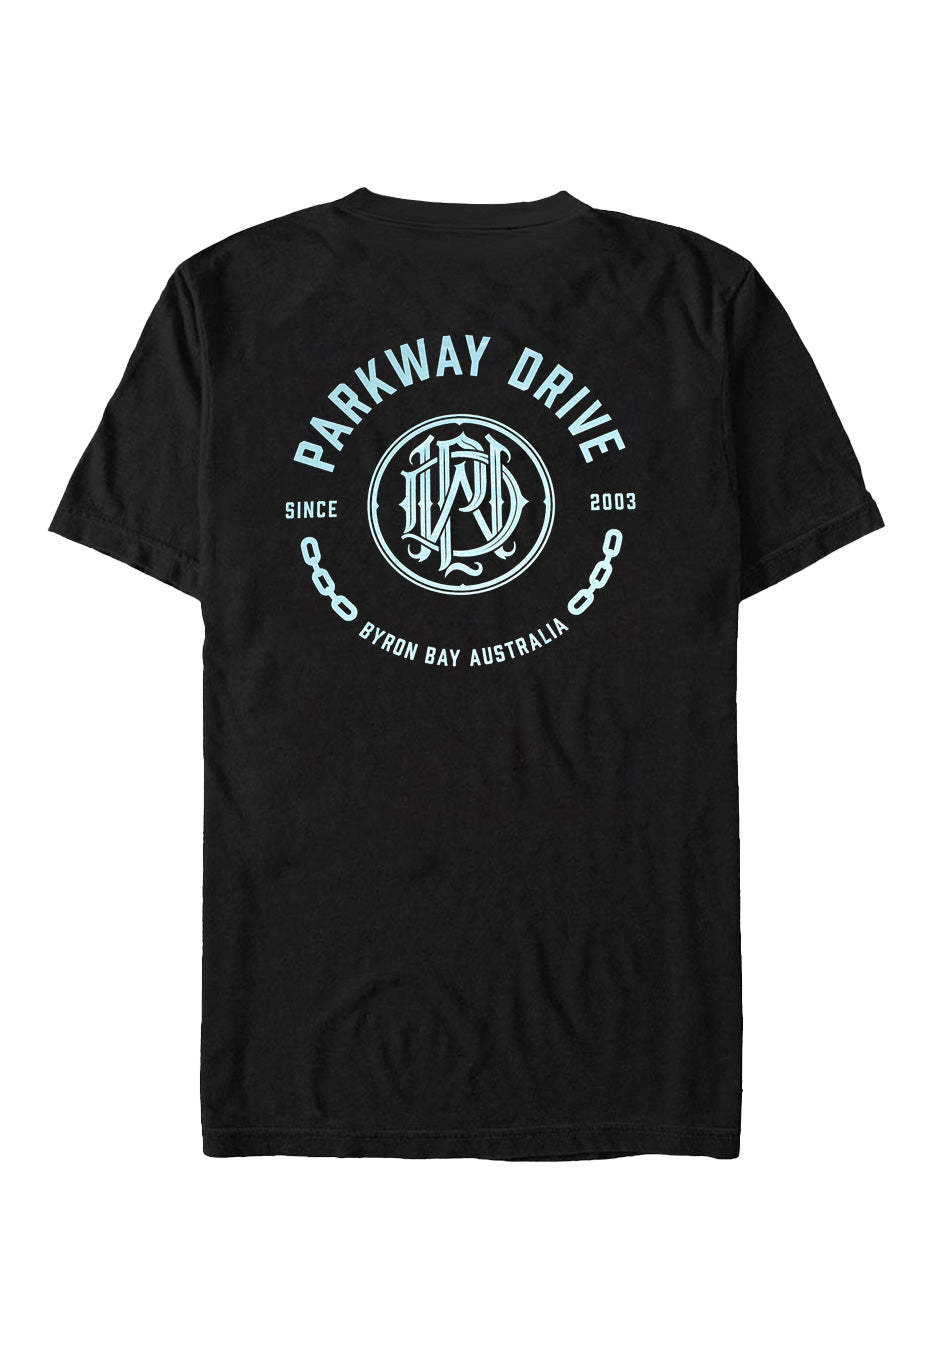 Parkway Drive - Crest 20 Years - T-Shirt